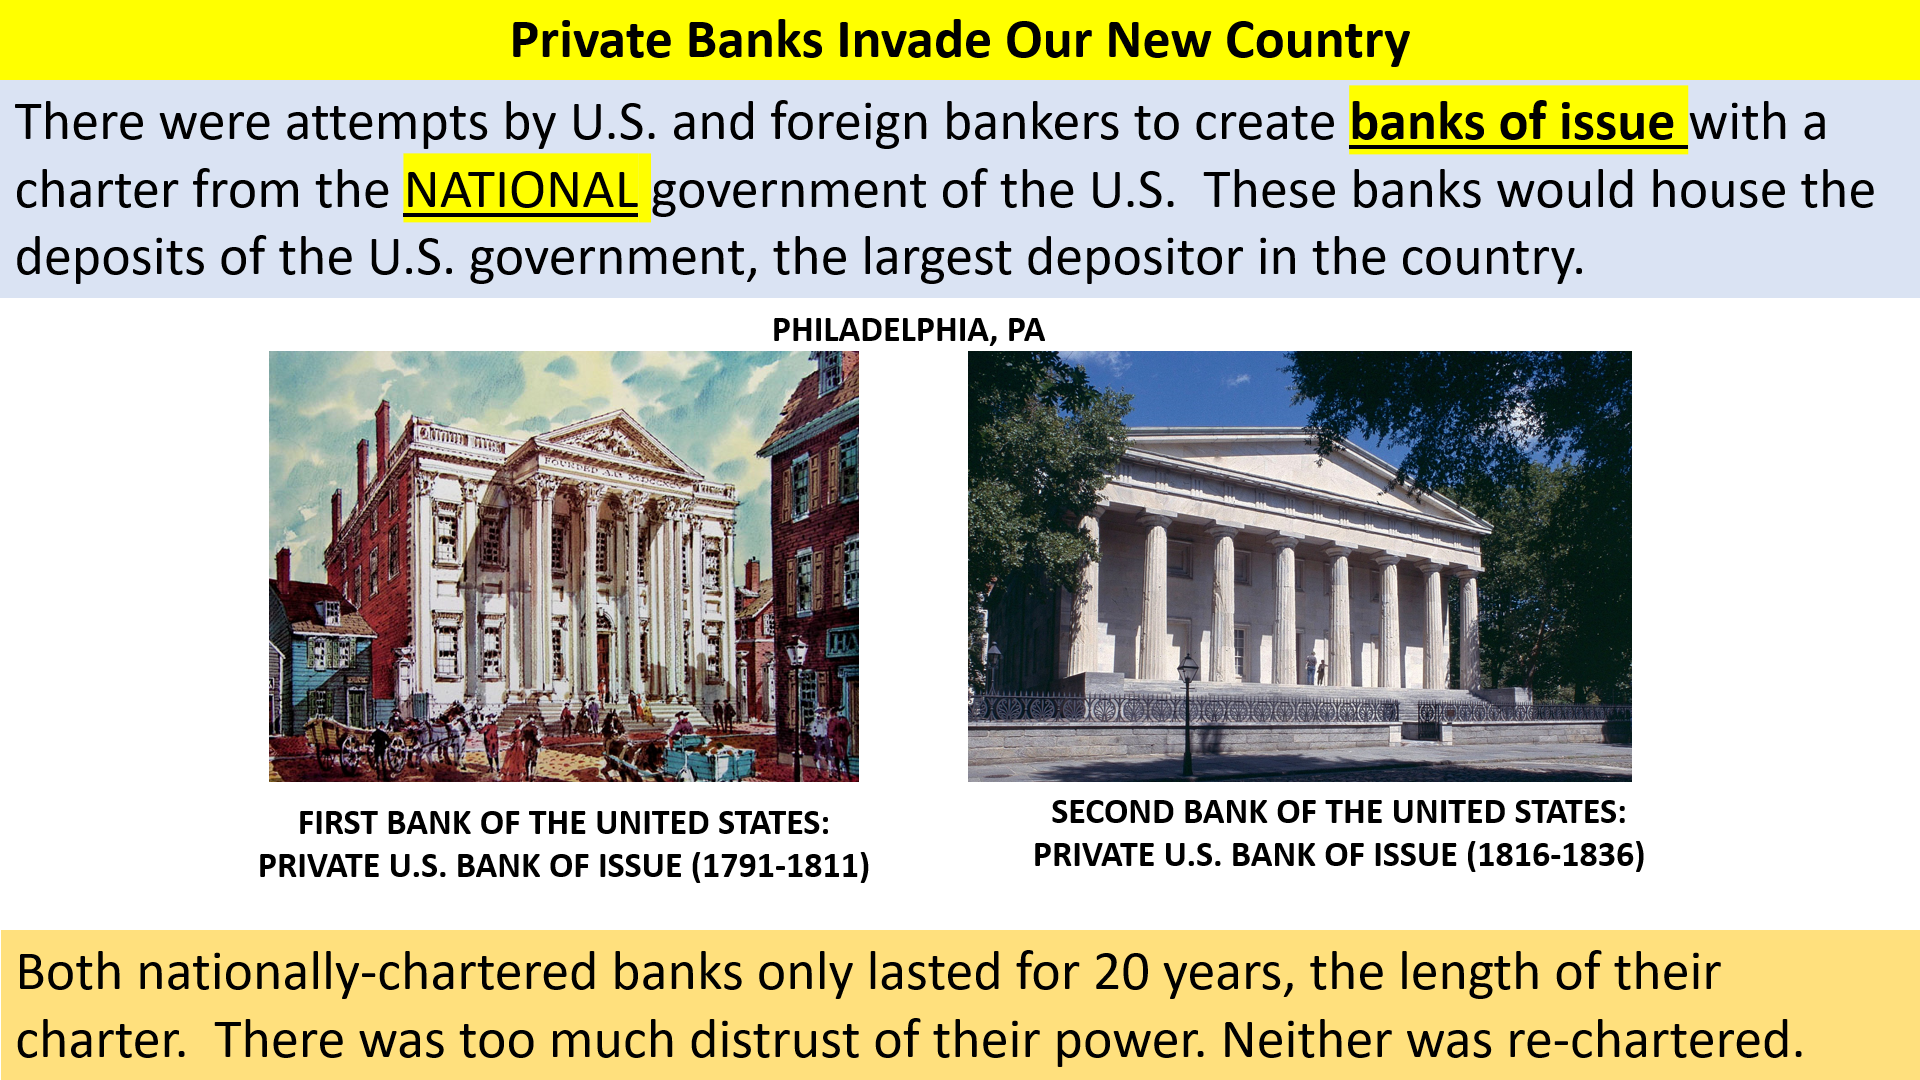 private banks of issue invade